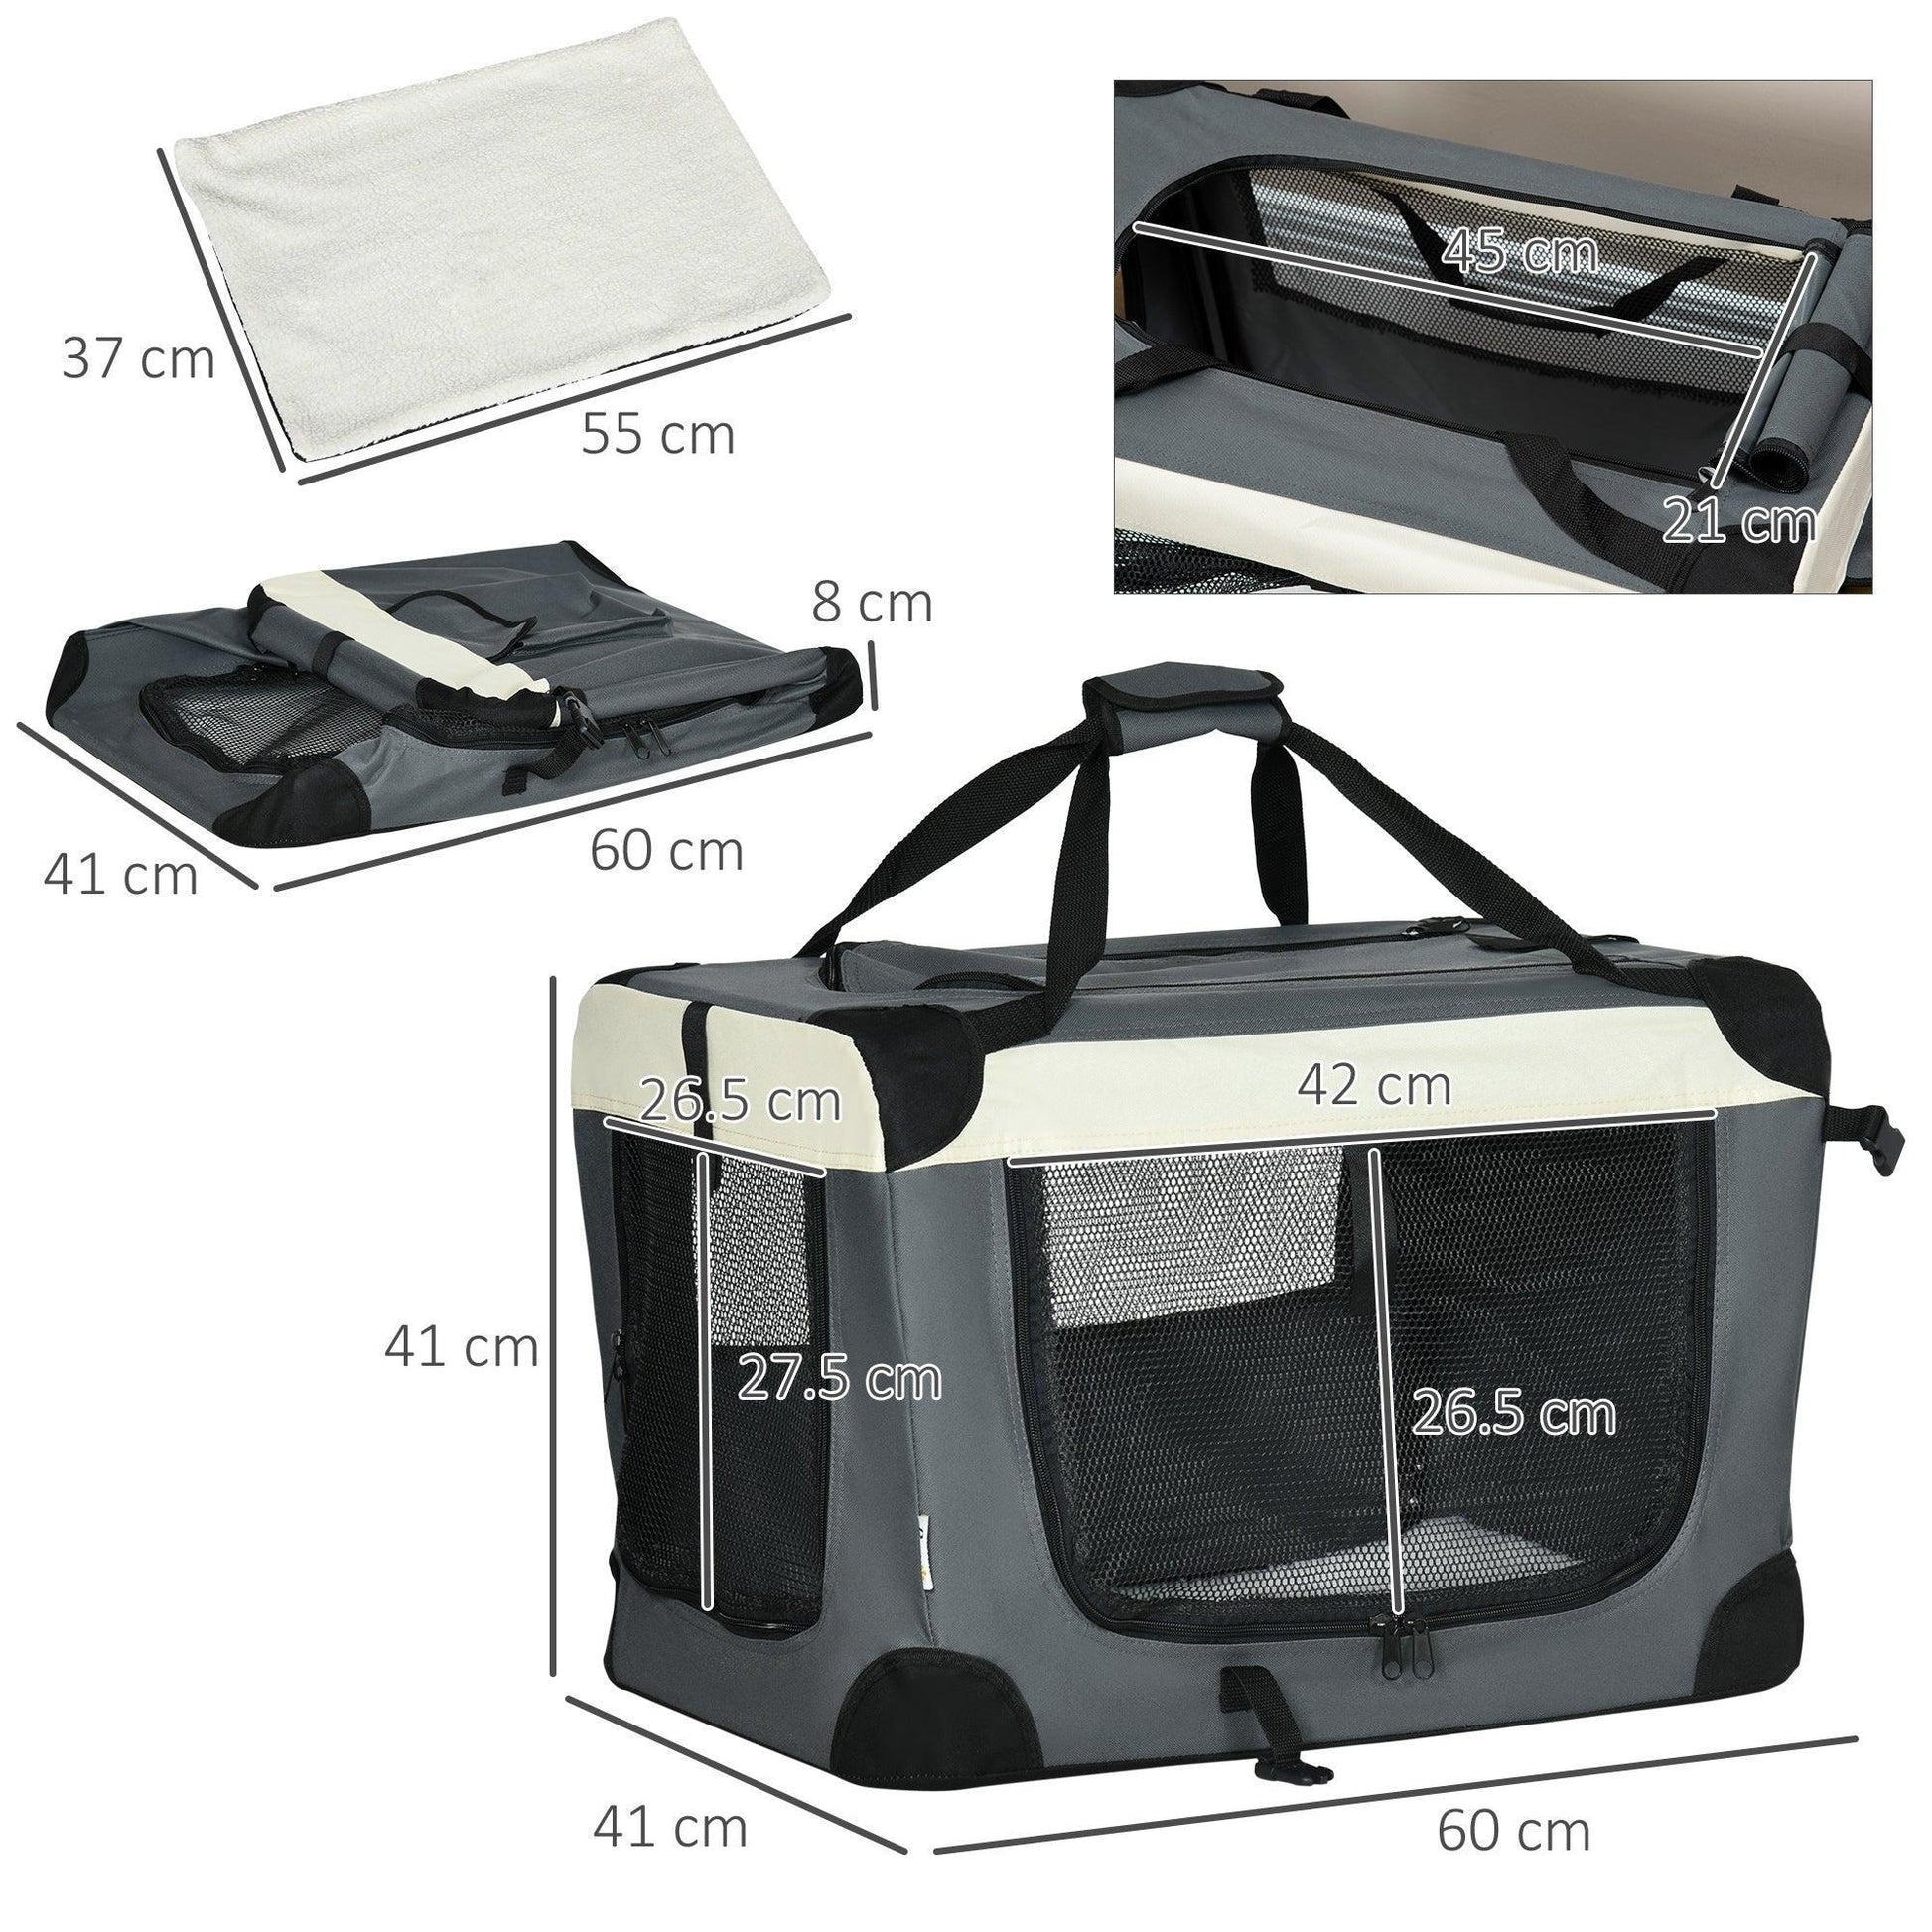 PawHut Portable Pet Carrier for Small Dogs, Grey - ALL4U RETAILER LTD